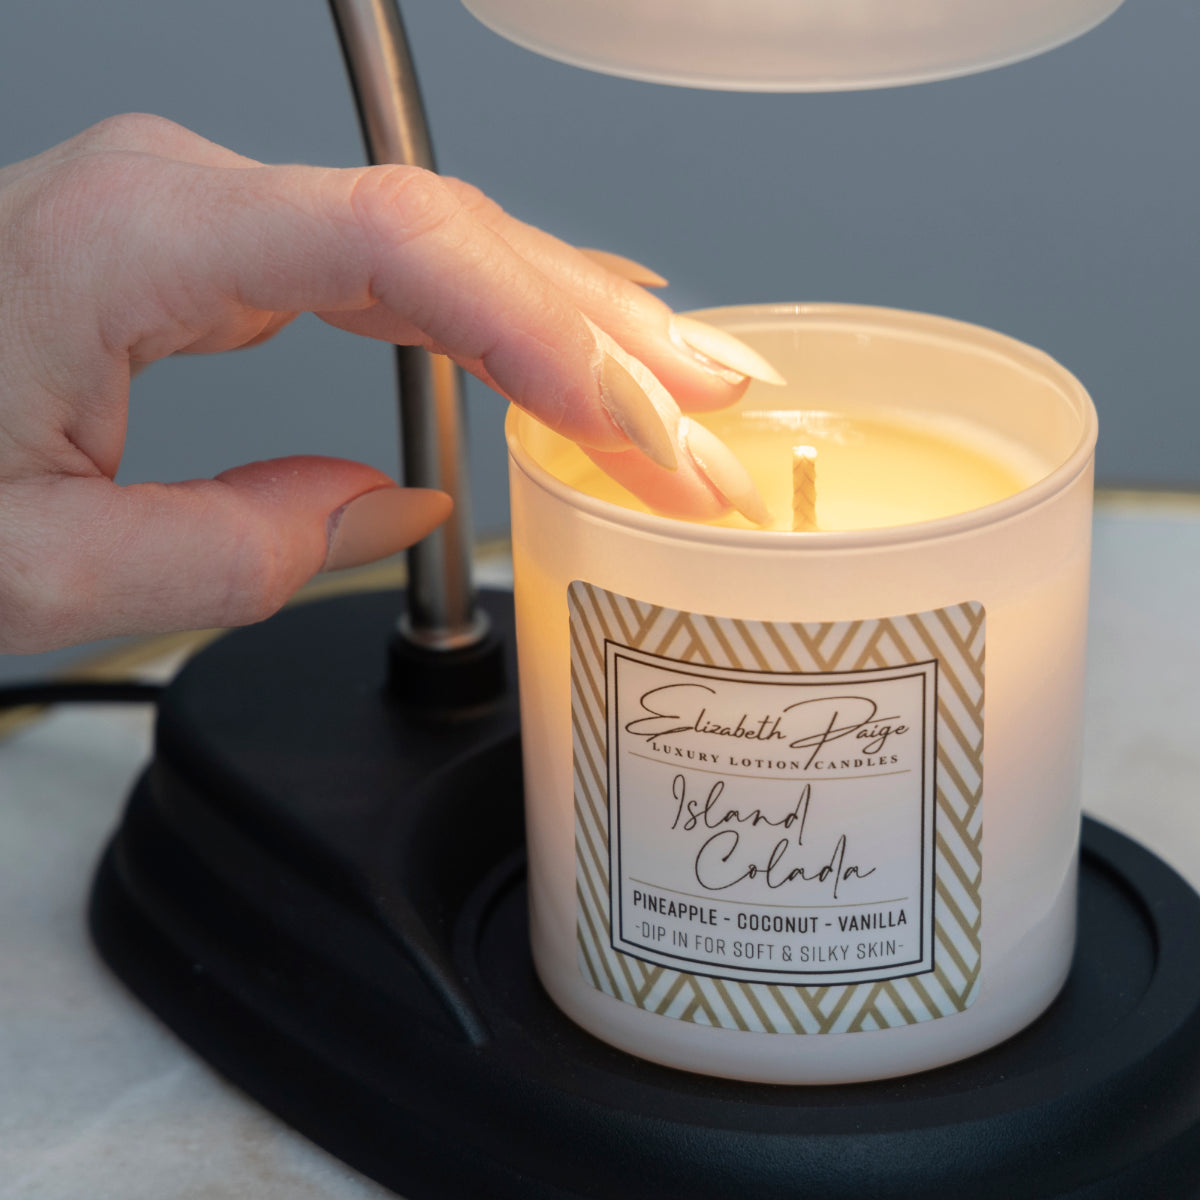 Best Wax Melter For Candle Making: Tested & Reviewed